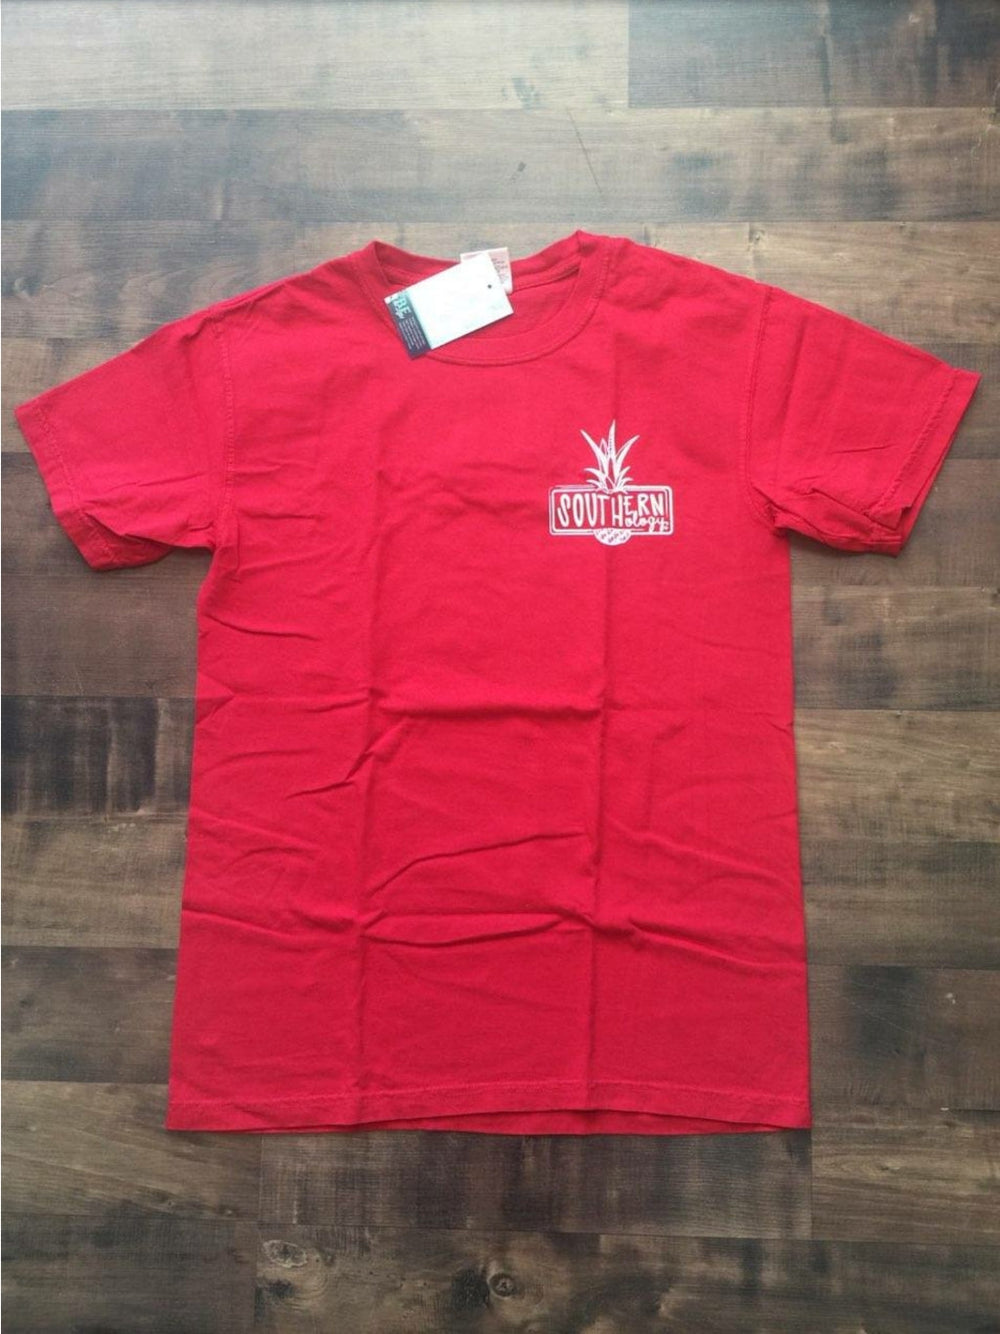 "Sweet Land of Liberty" Southernology Graphic T-Shirt-Ever Joy